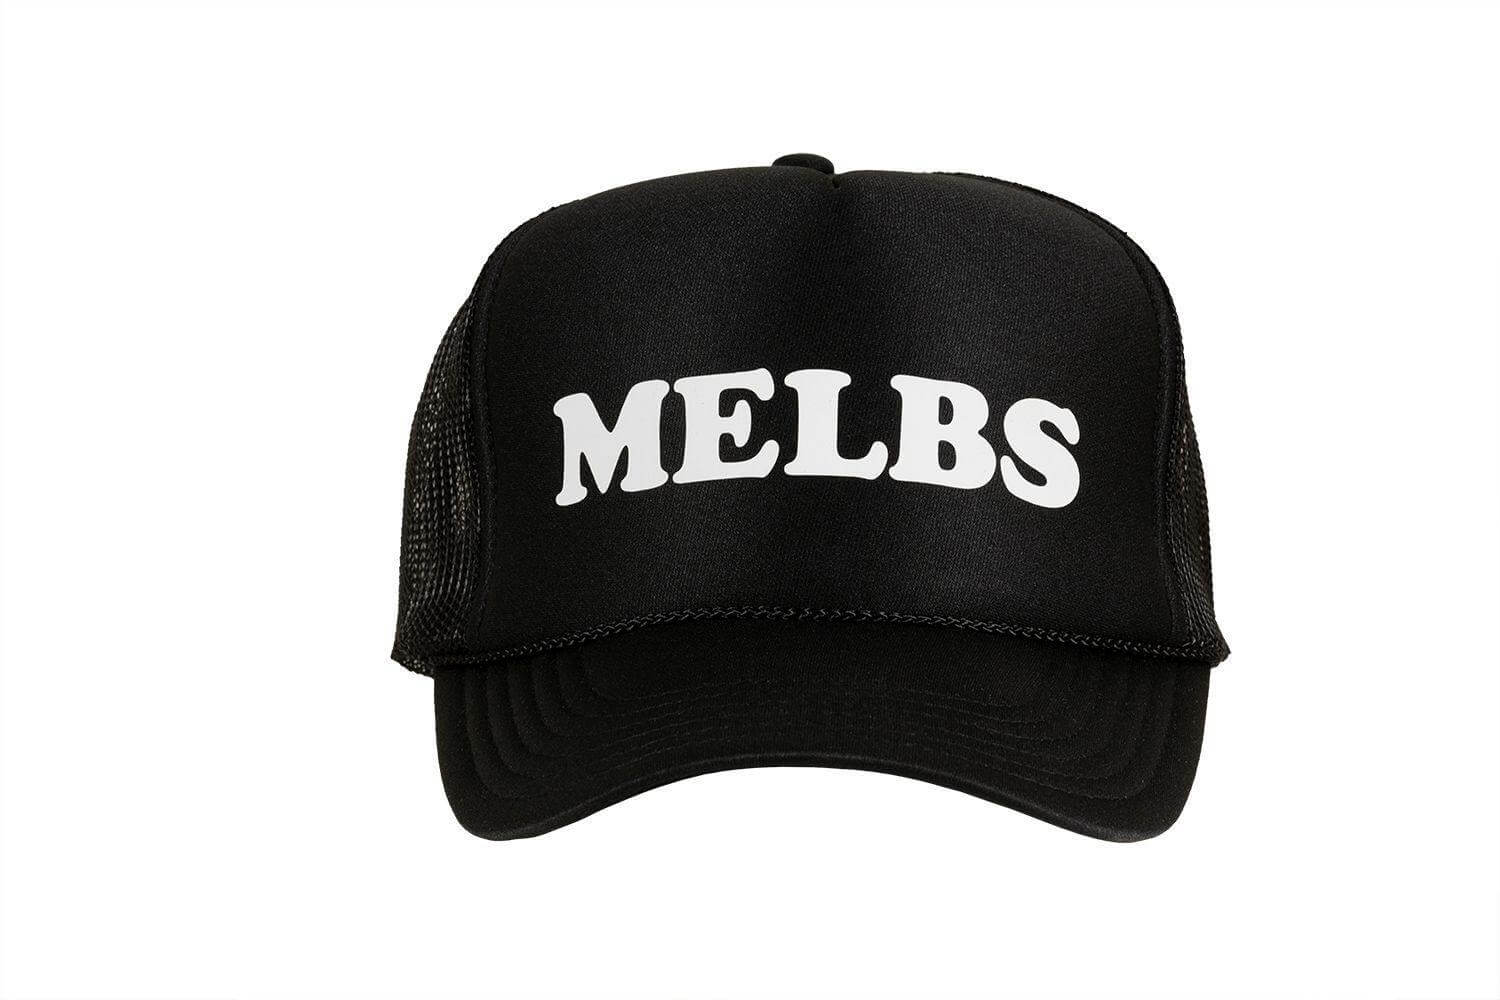 Melbourne high crown trucker cap with mesh back and snapback - Tropic Trucker Australia®